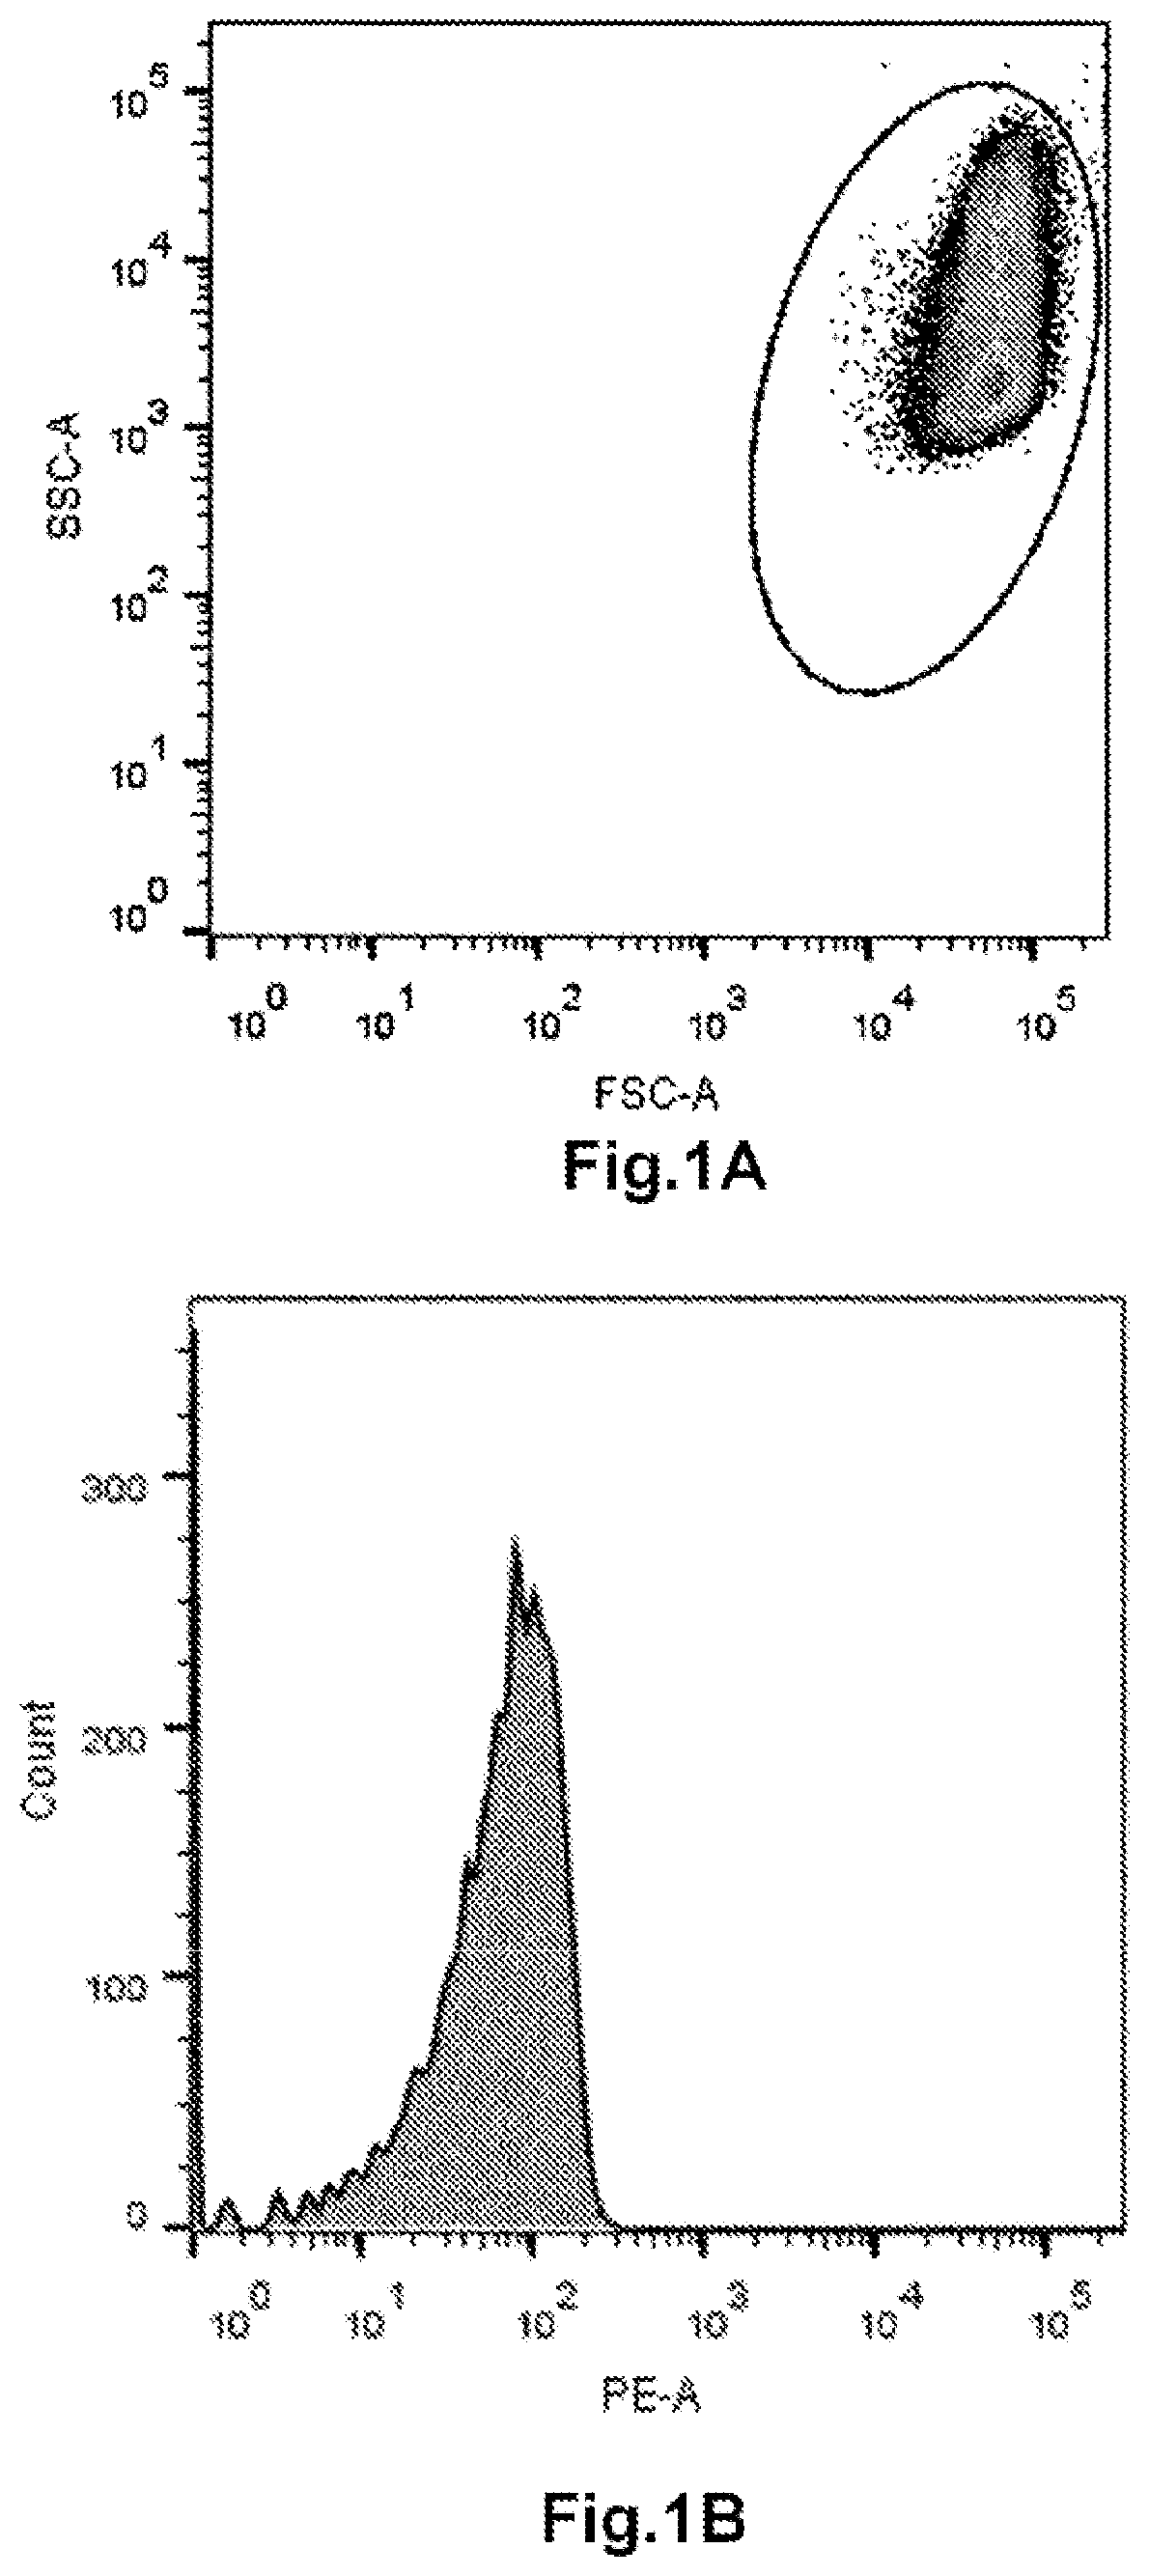 Method for determining the haemoglobin F content of an erythroid cell